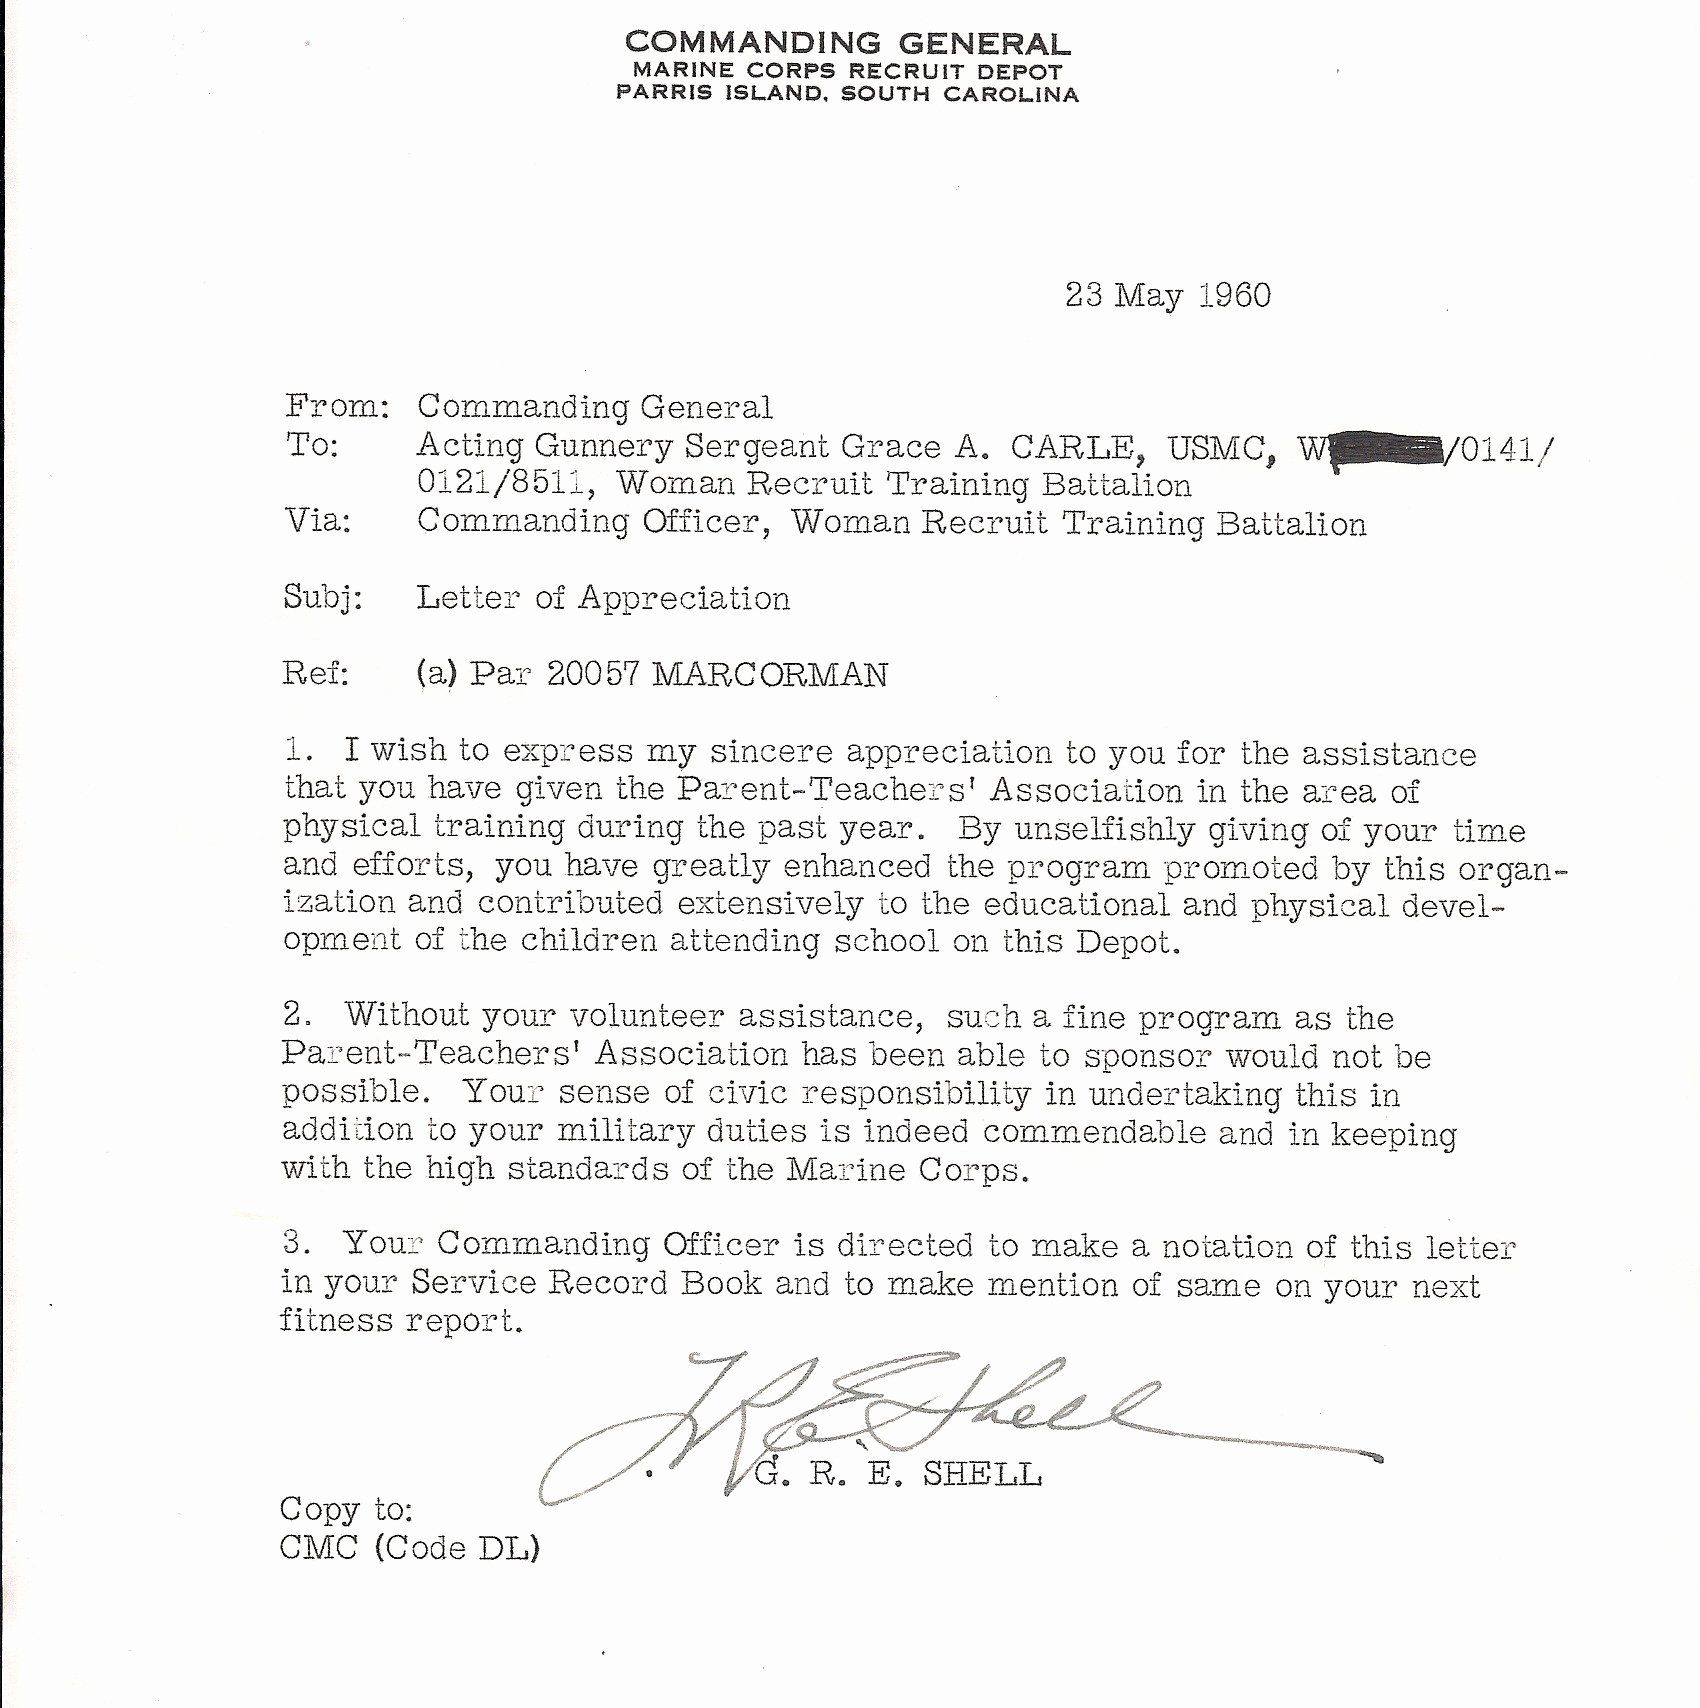 30 Warrant Officer Letter Of Recommendation In 2020 With inside proportions 1700 X 1708